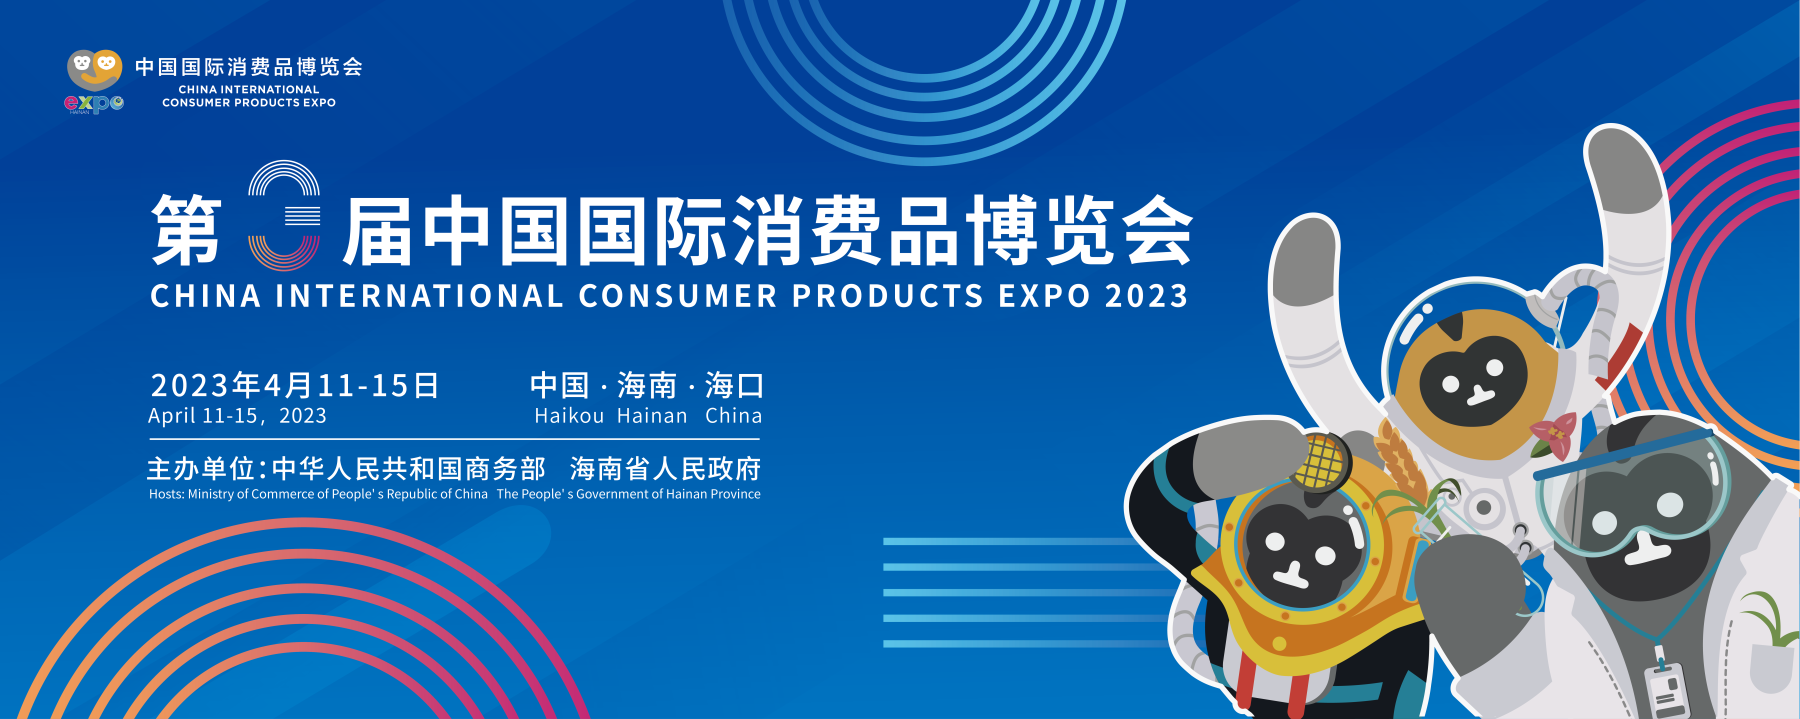 The 3rd China International Consumer Products Expo Is Set to Run In Haikou From April 11th-15th